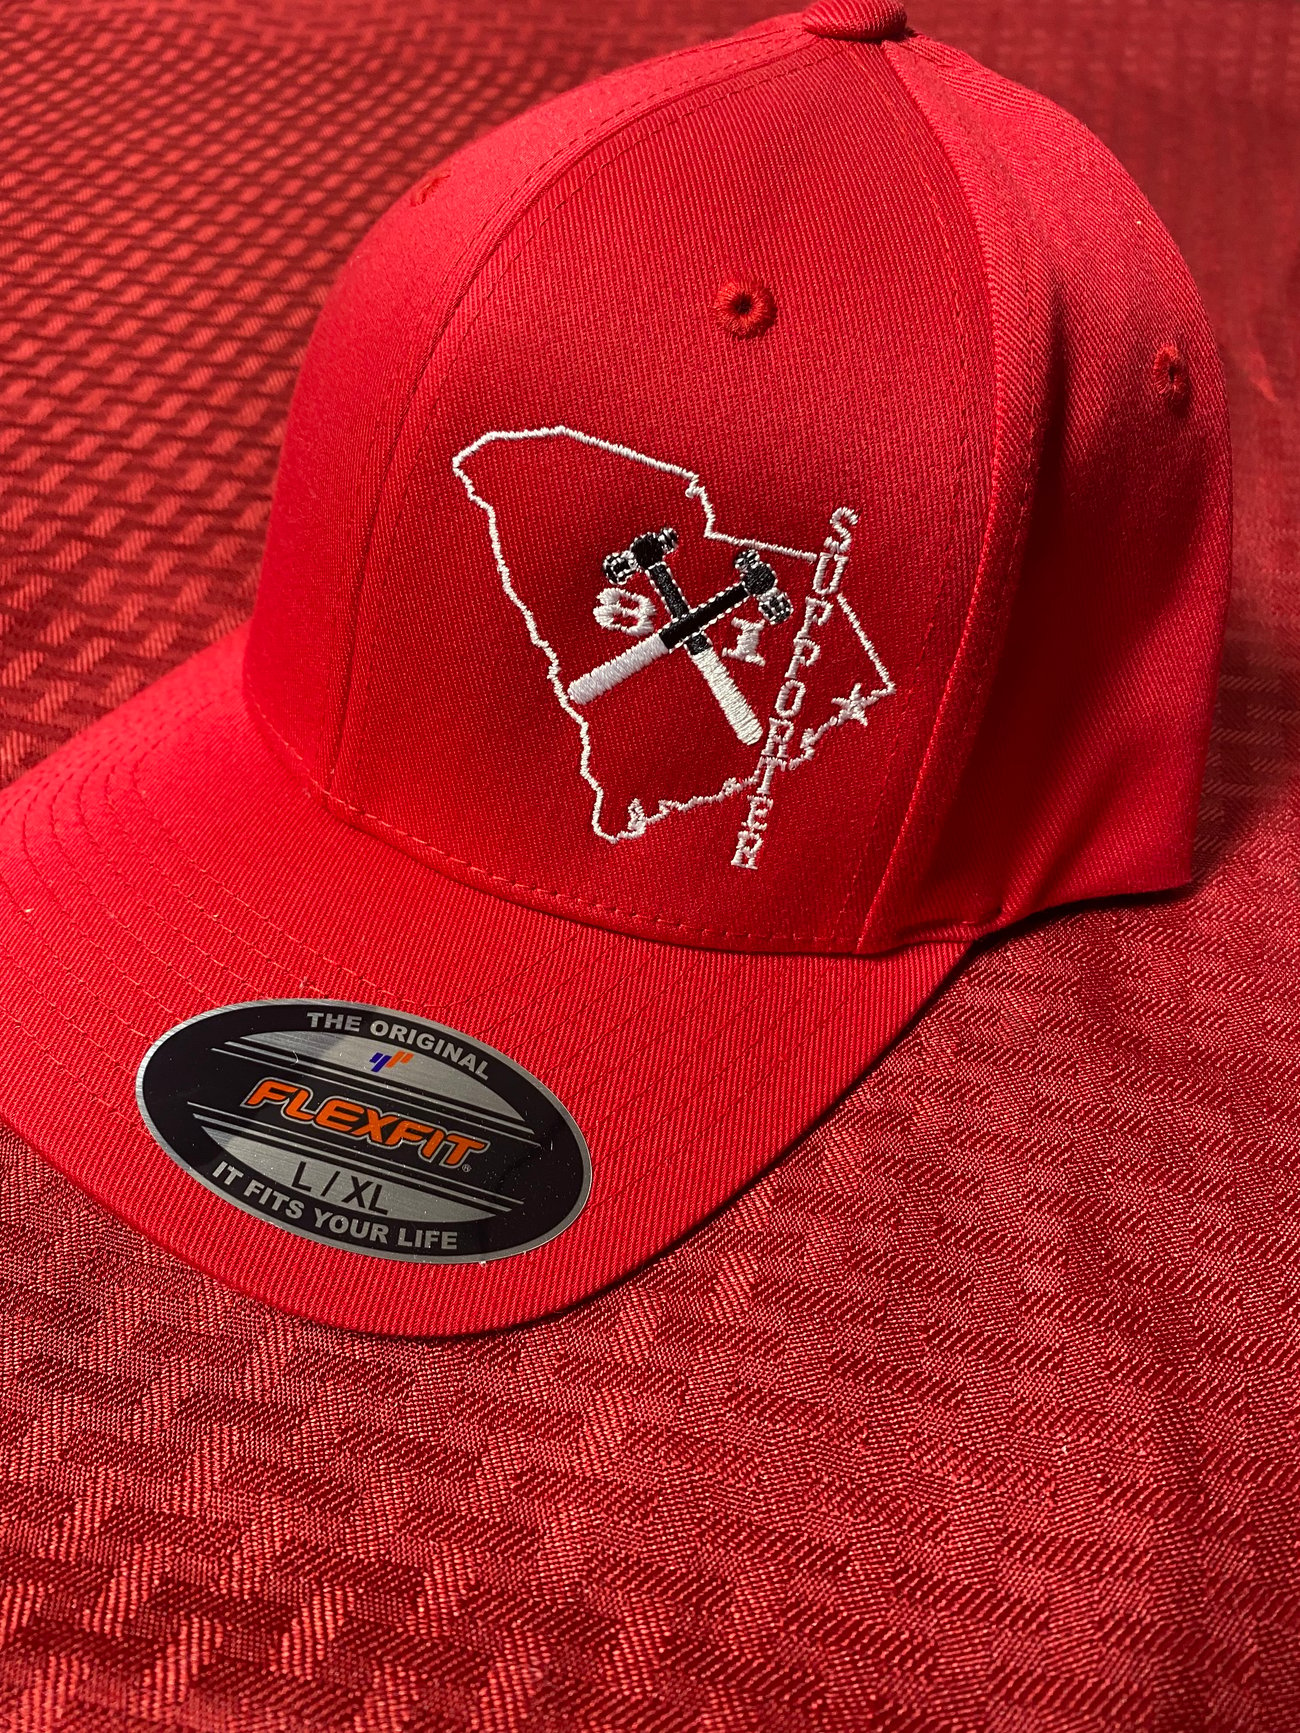 NEW-State Logo 81 support hat (red) | Hells Angels Myrtle Beach Support ...